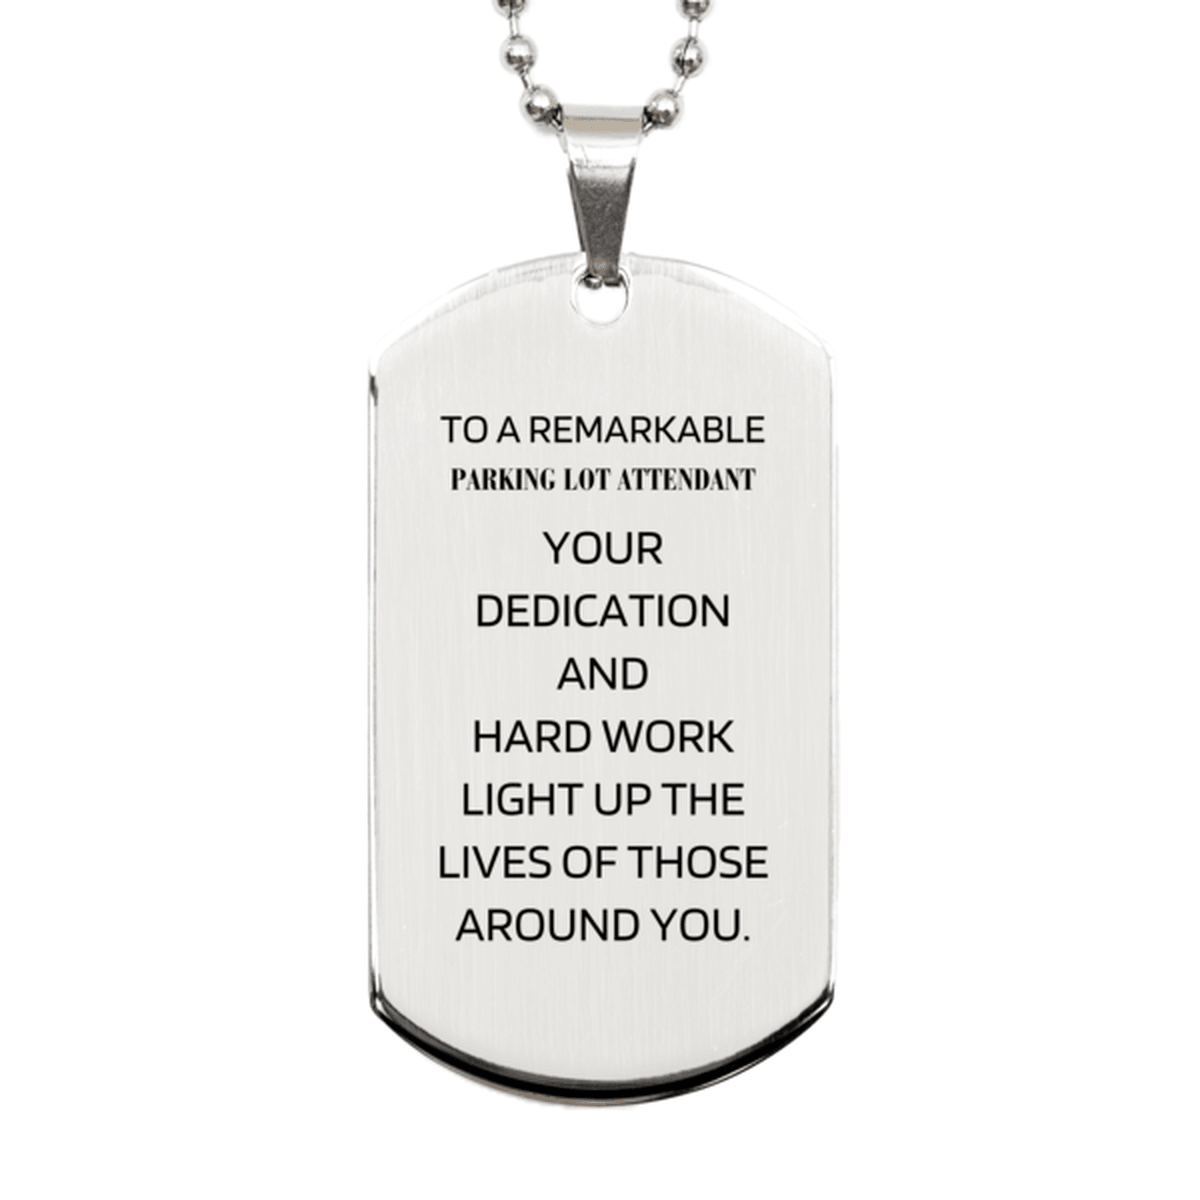 Remarkable Parking Lot Attendant Gifts, Your dedication and hard work, Inspirational Birthday Christmas Unique Silver Dog Tag For Parking Lot Attendant, Coworkers, Men, Women, Friends - Mallard Moon Gift Shop